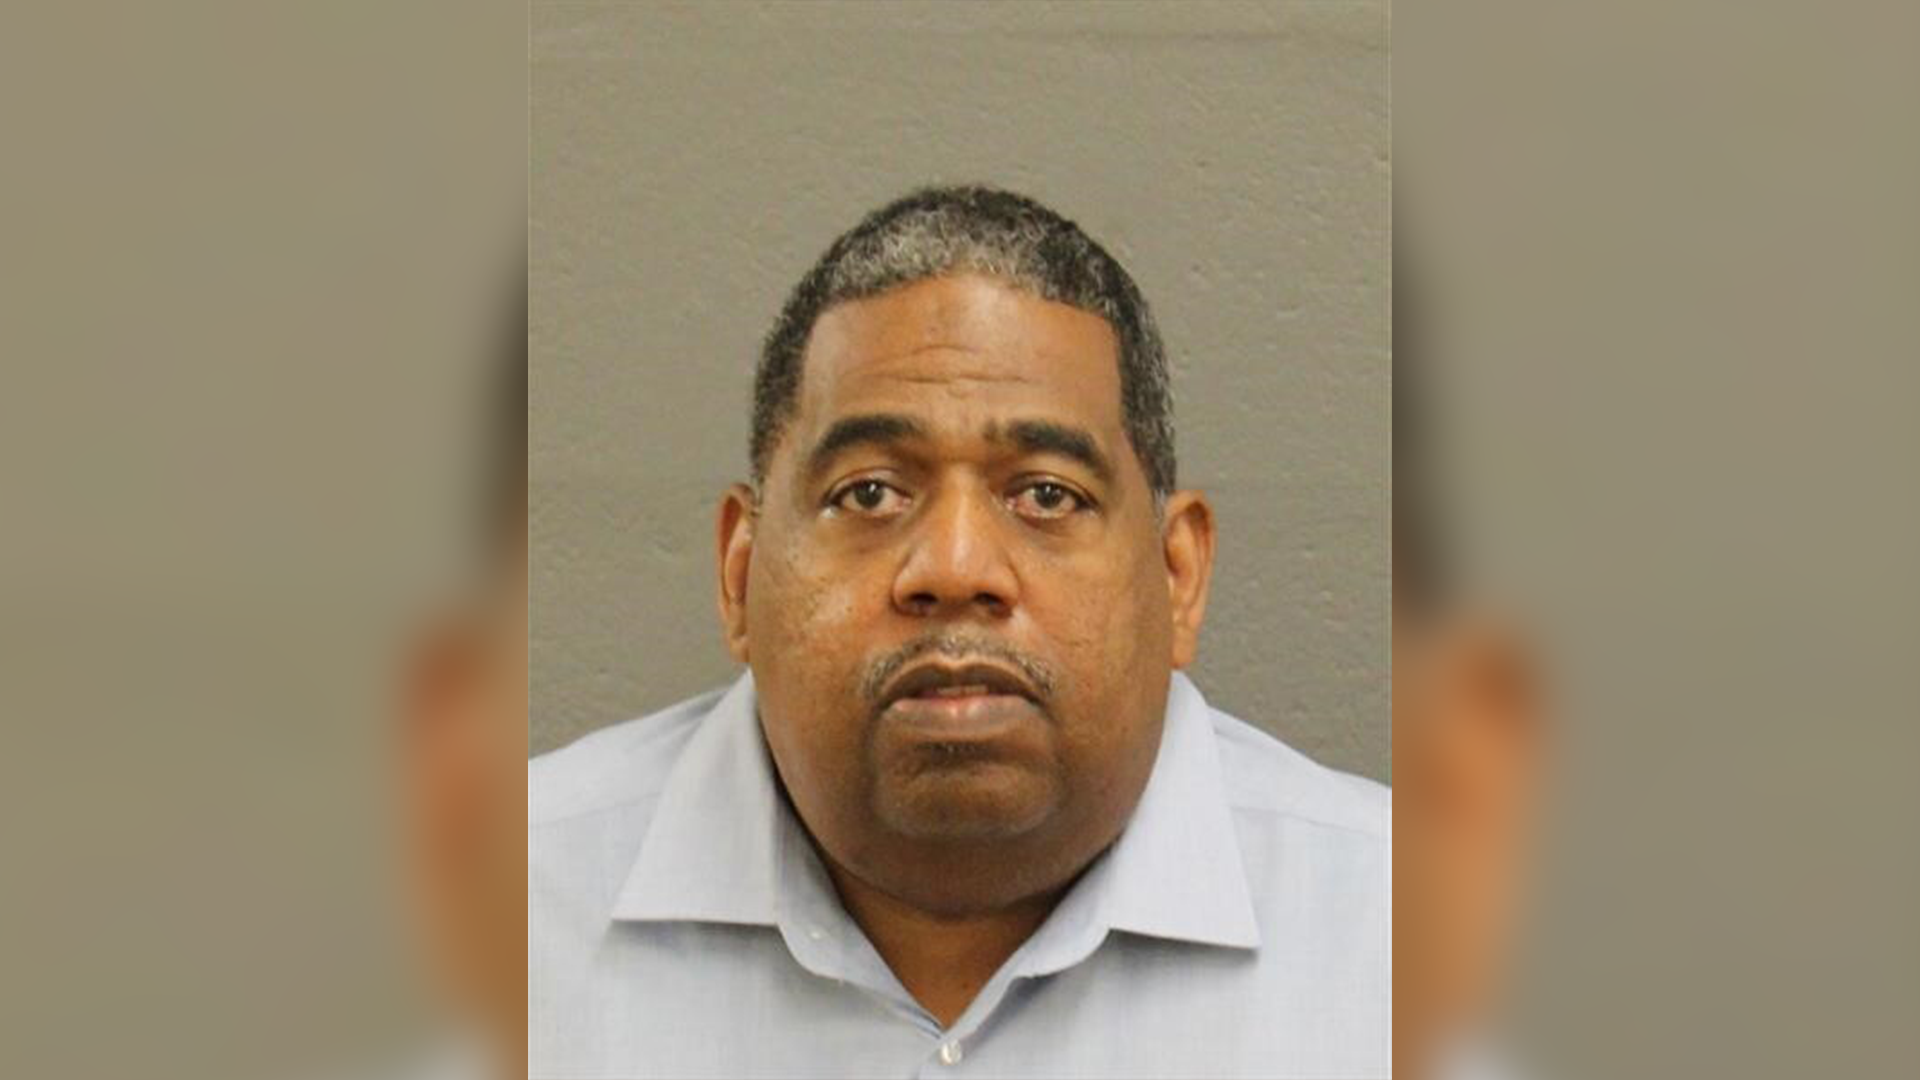 Holy Ghost Headquarters Pastor Mark Hatcher Charged With Sexually Assaulting 3 Young People